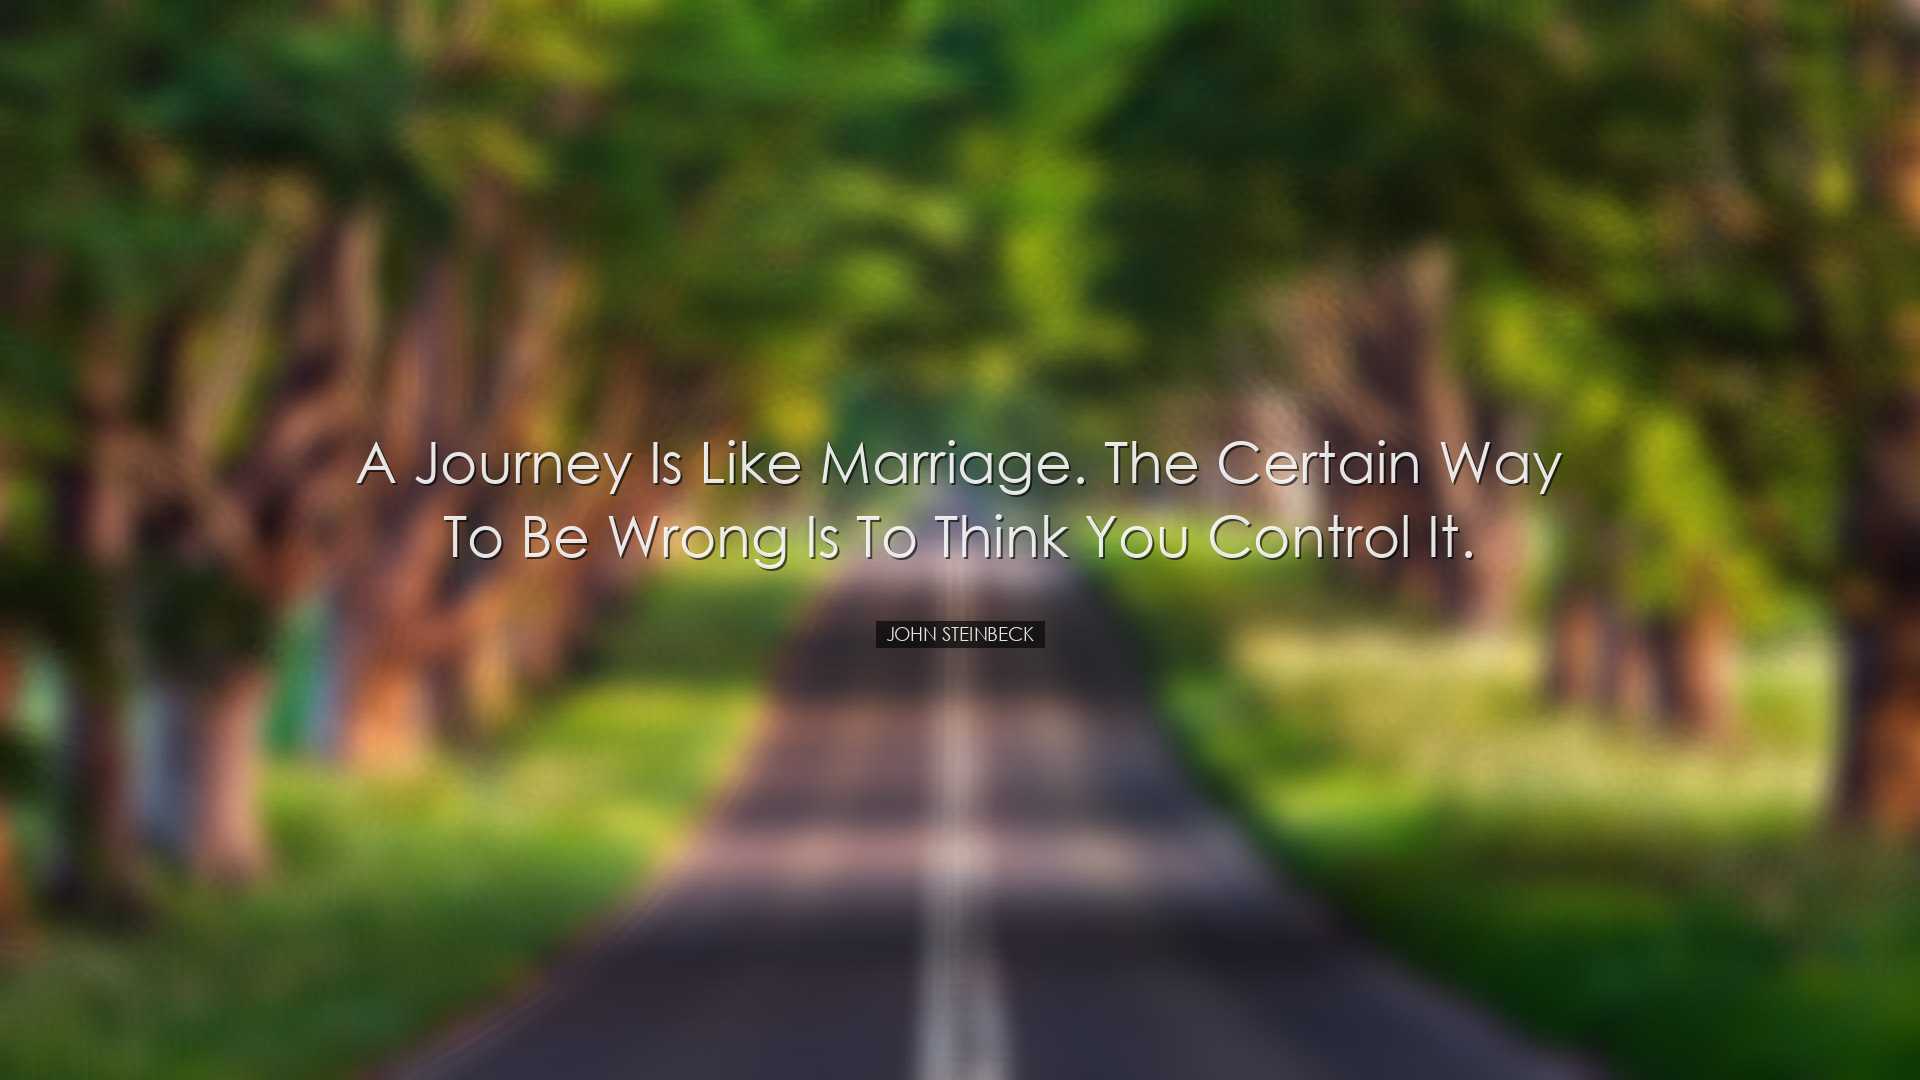 A journey is like marriage. The certain way to be wrong is to thin